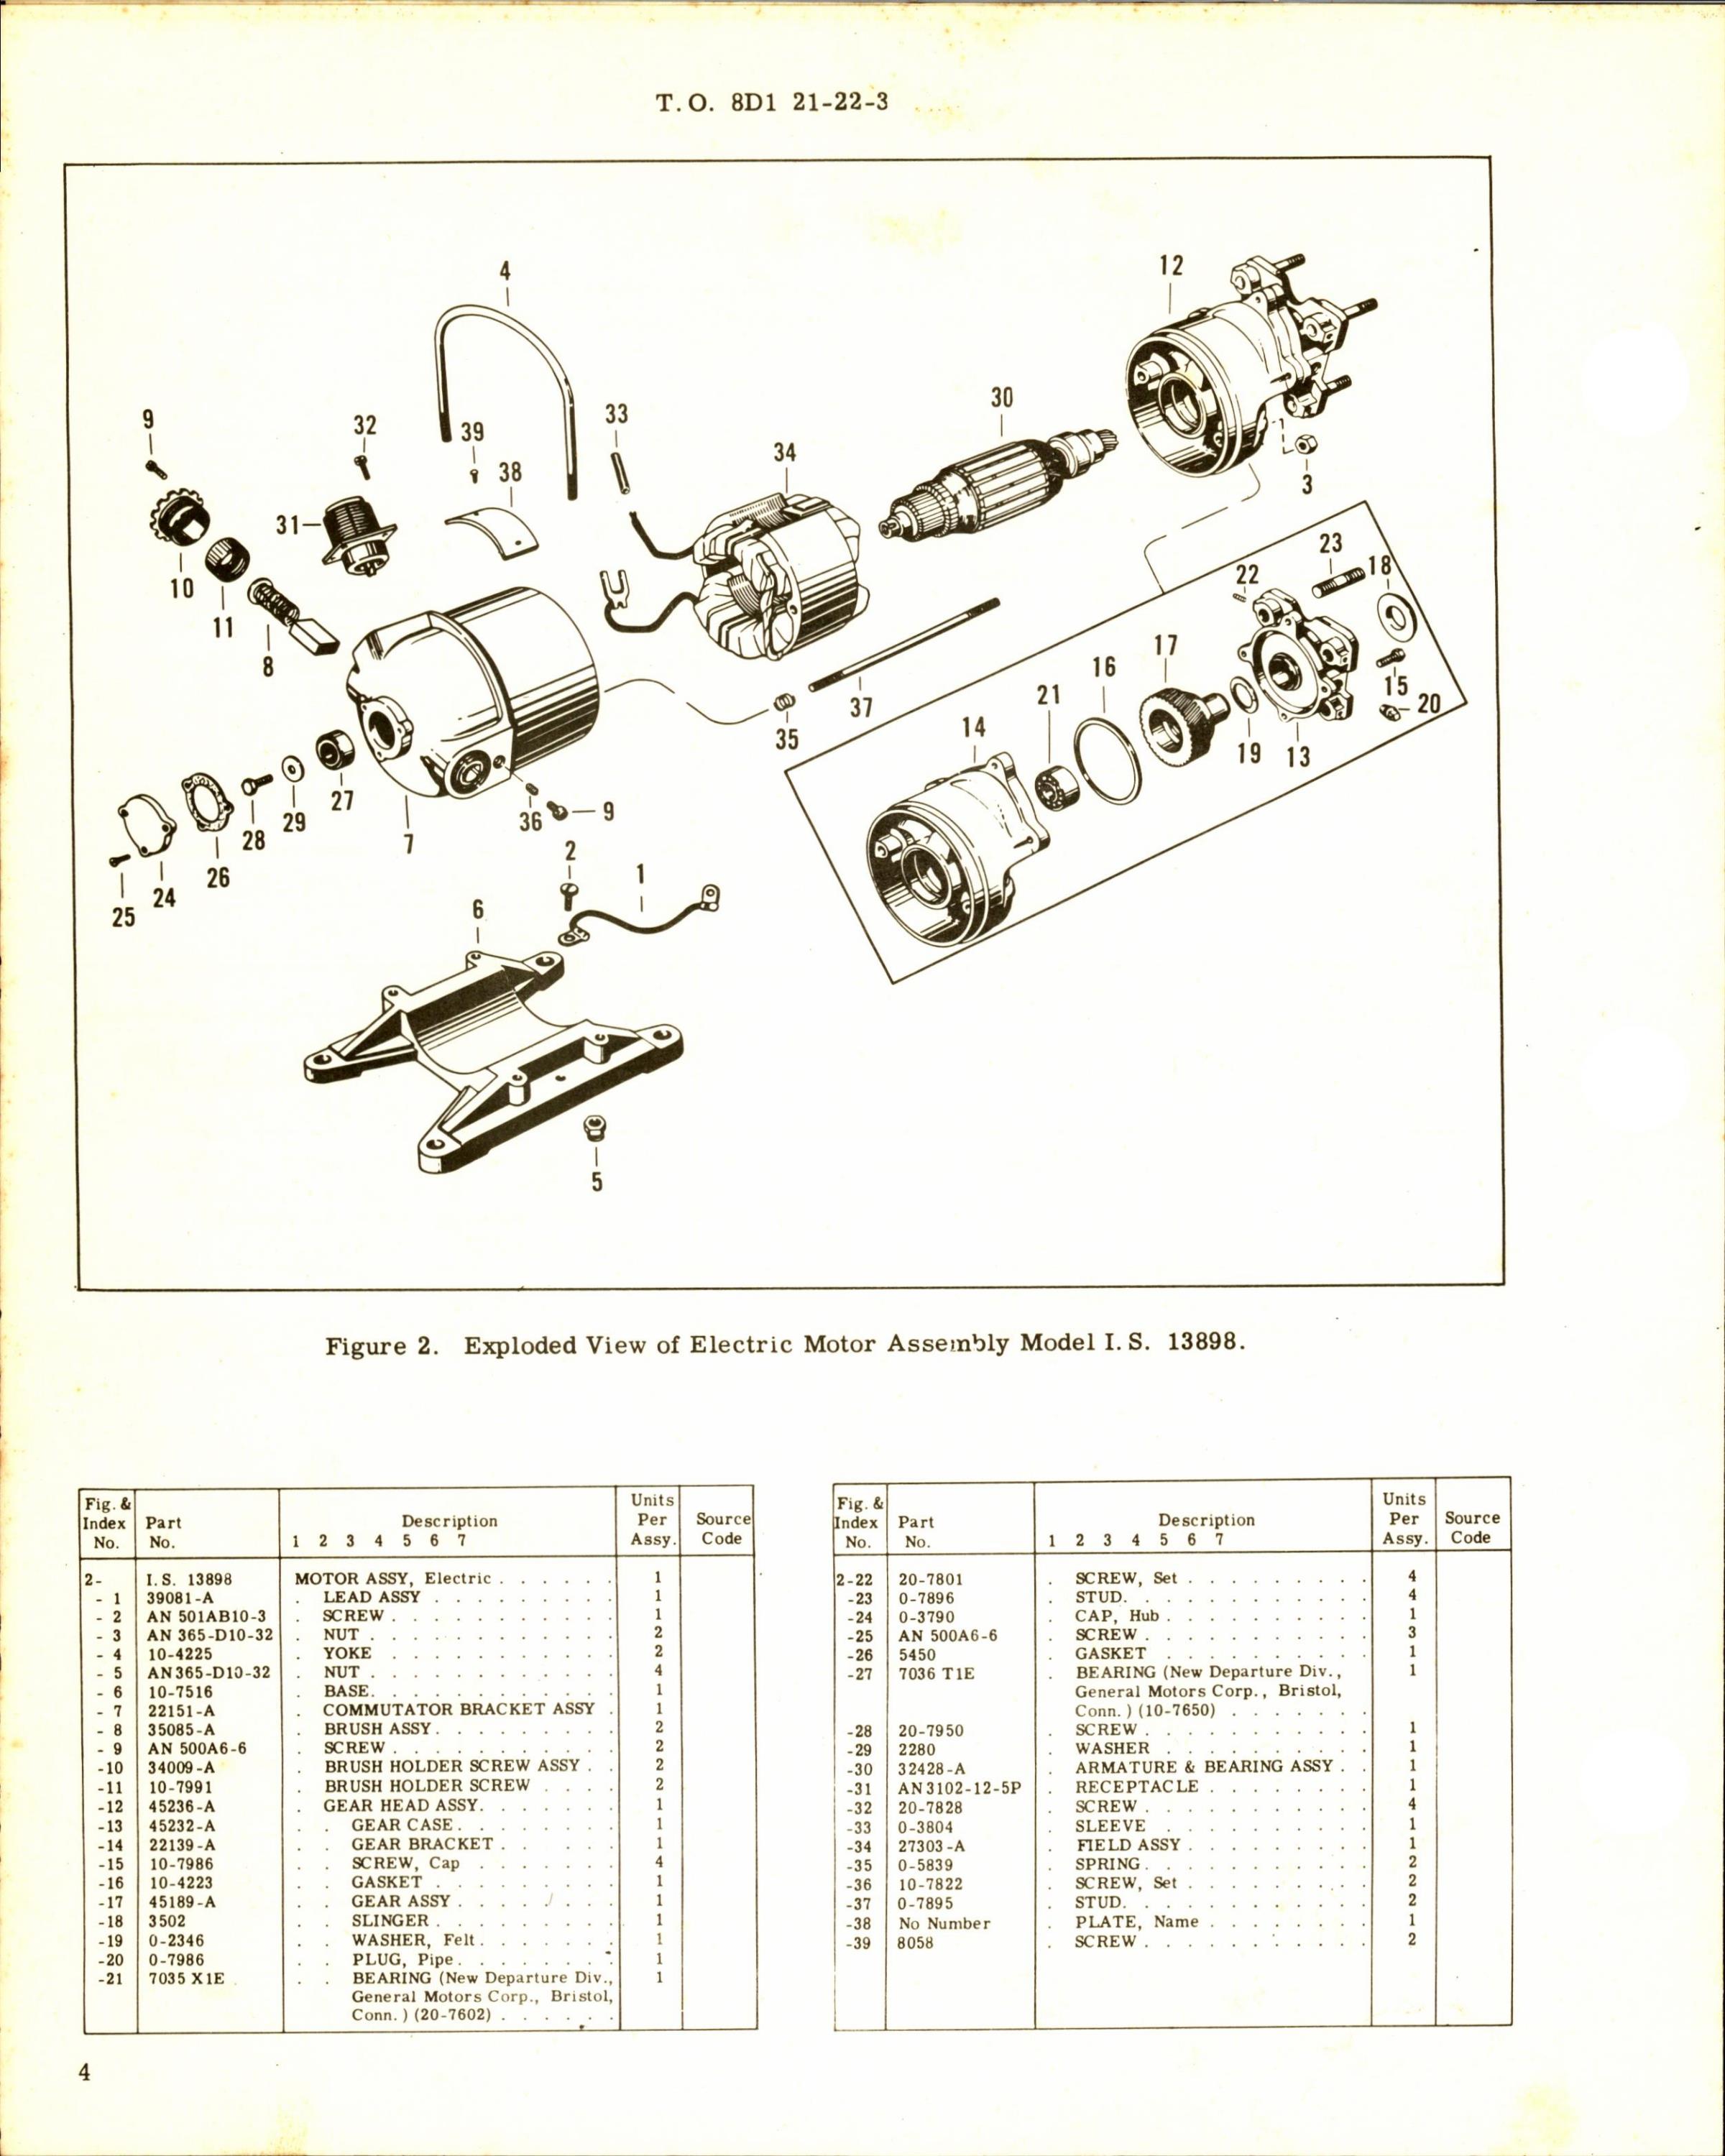 Sample page 4 from AirCorps Library document: Overhaul Instructions with Parts Breakdown for Electric Motor Assembly Model I.S. 13898